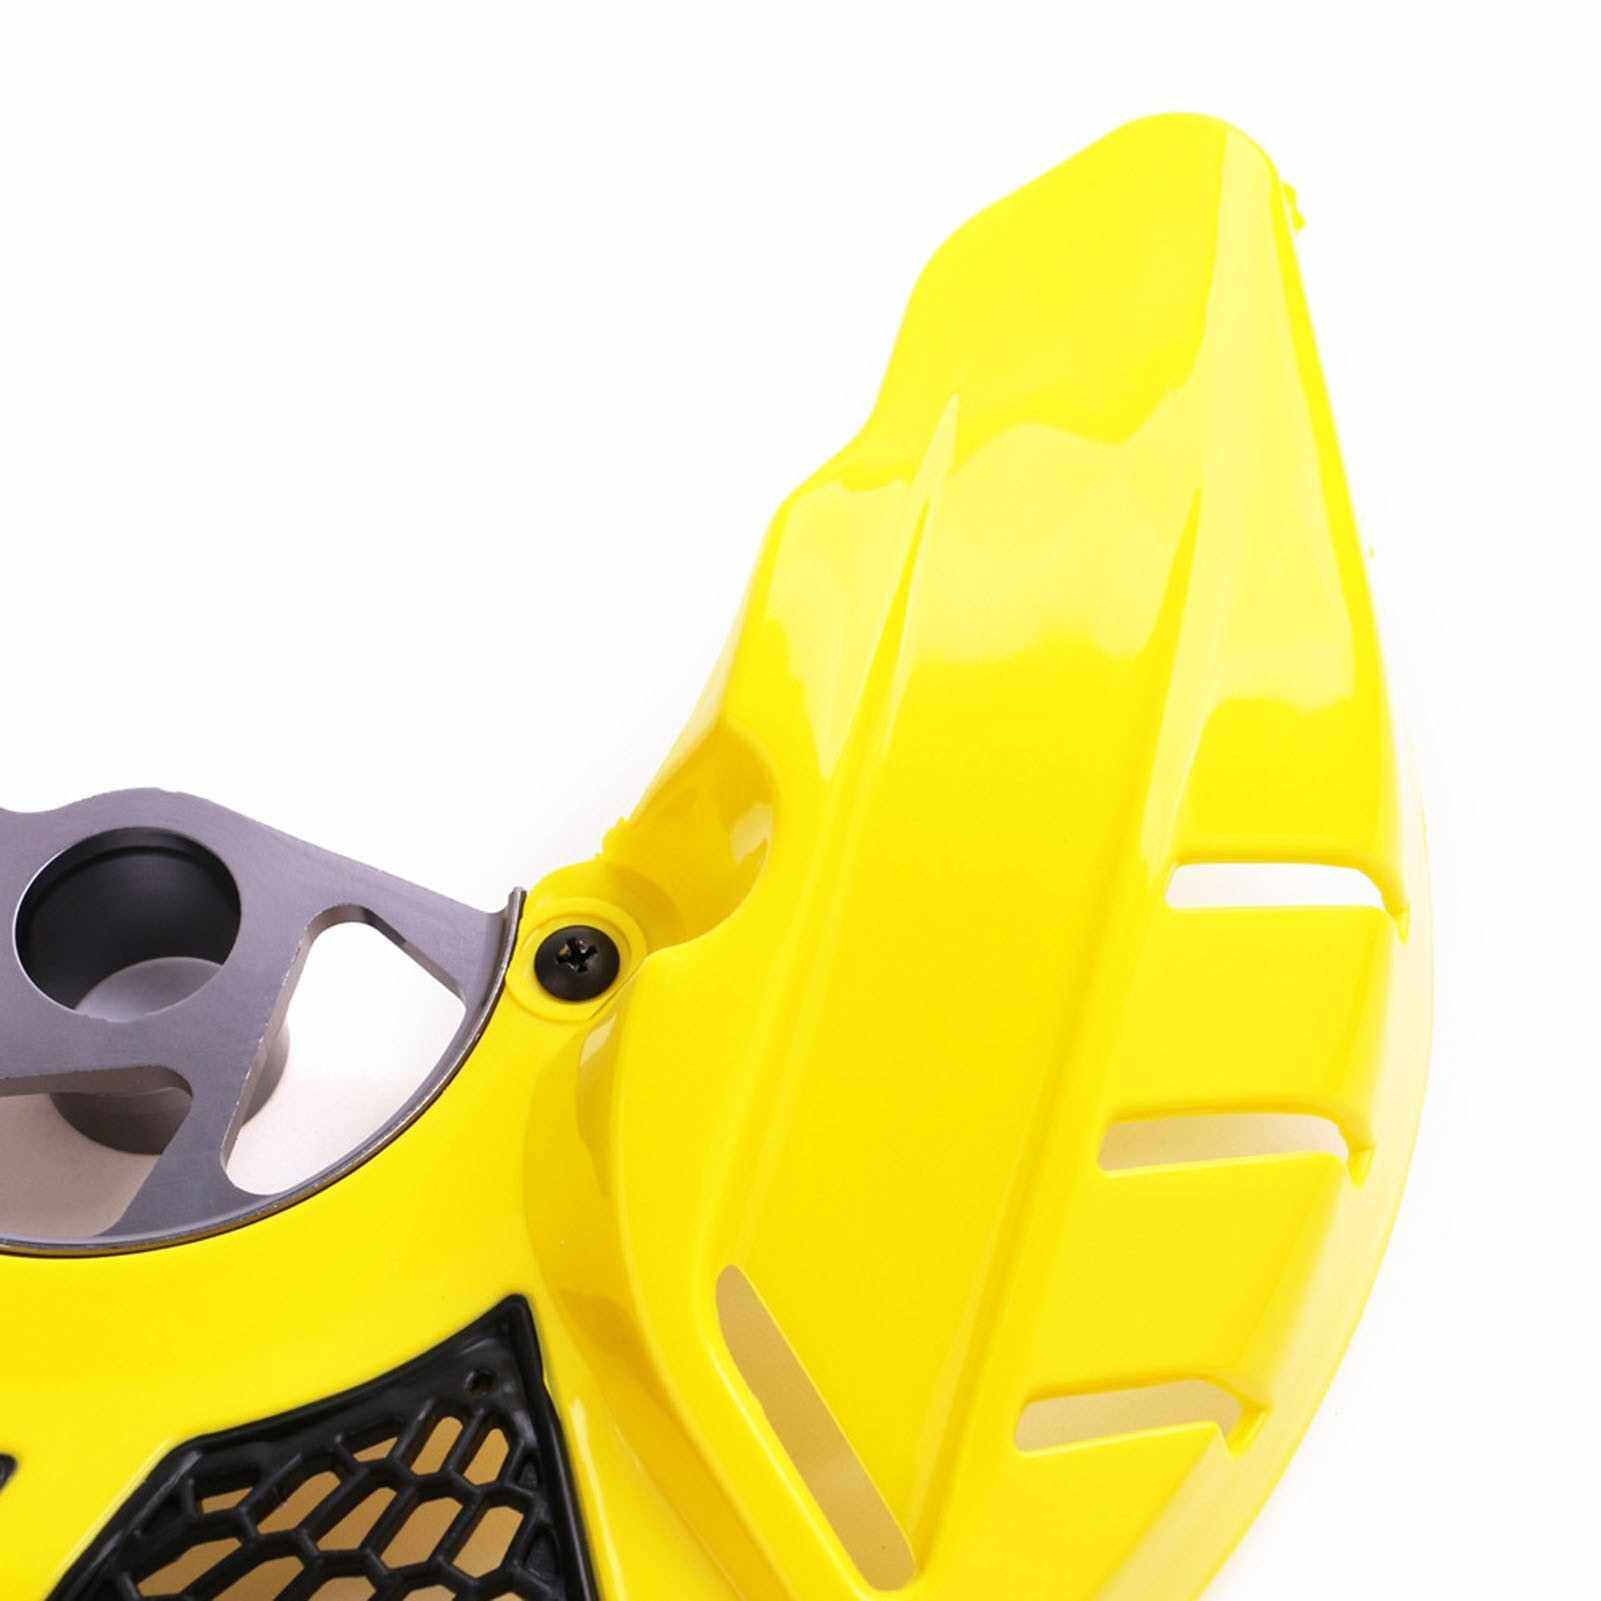 Motorcycle Front Brake Disc Guard Cover Replacement for HONDA CR125R,CRF250R,CRF450R,SX,SXF,XC (Yellow)